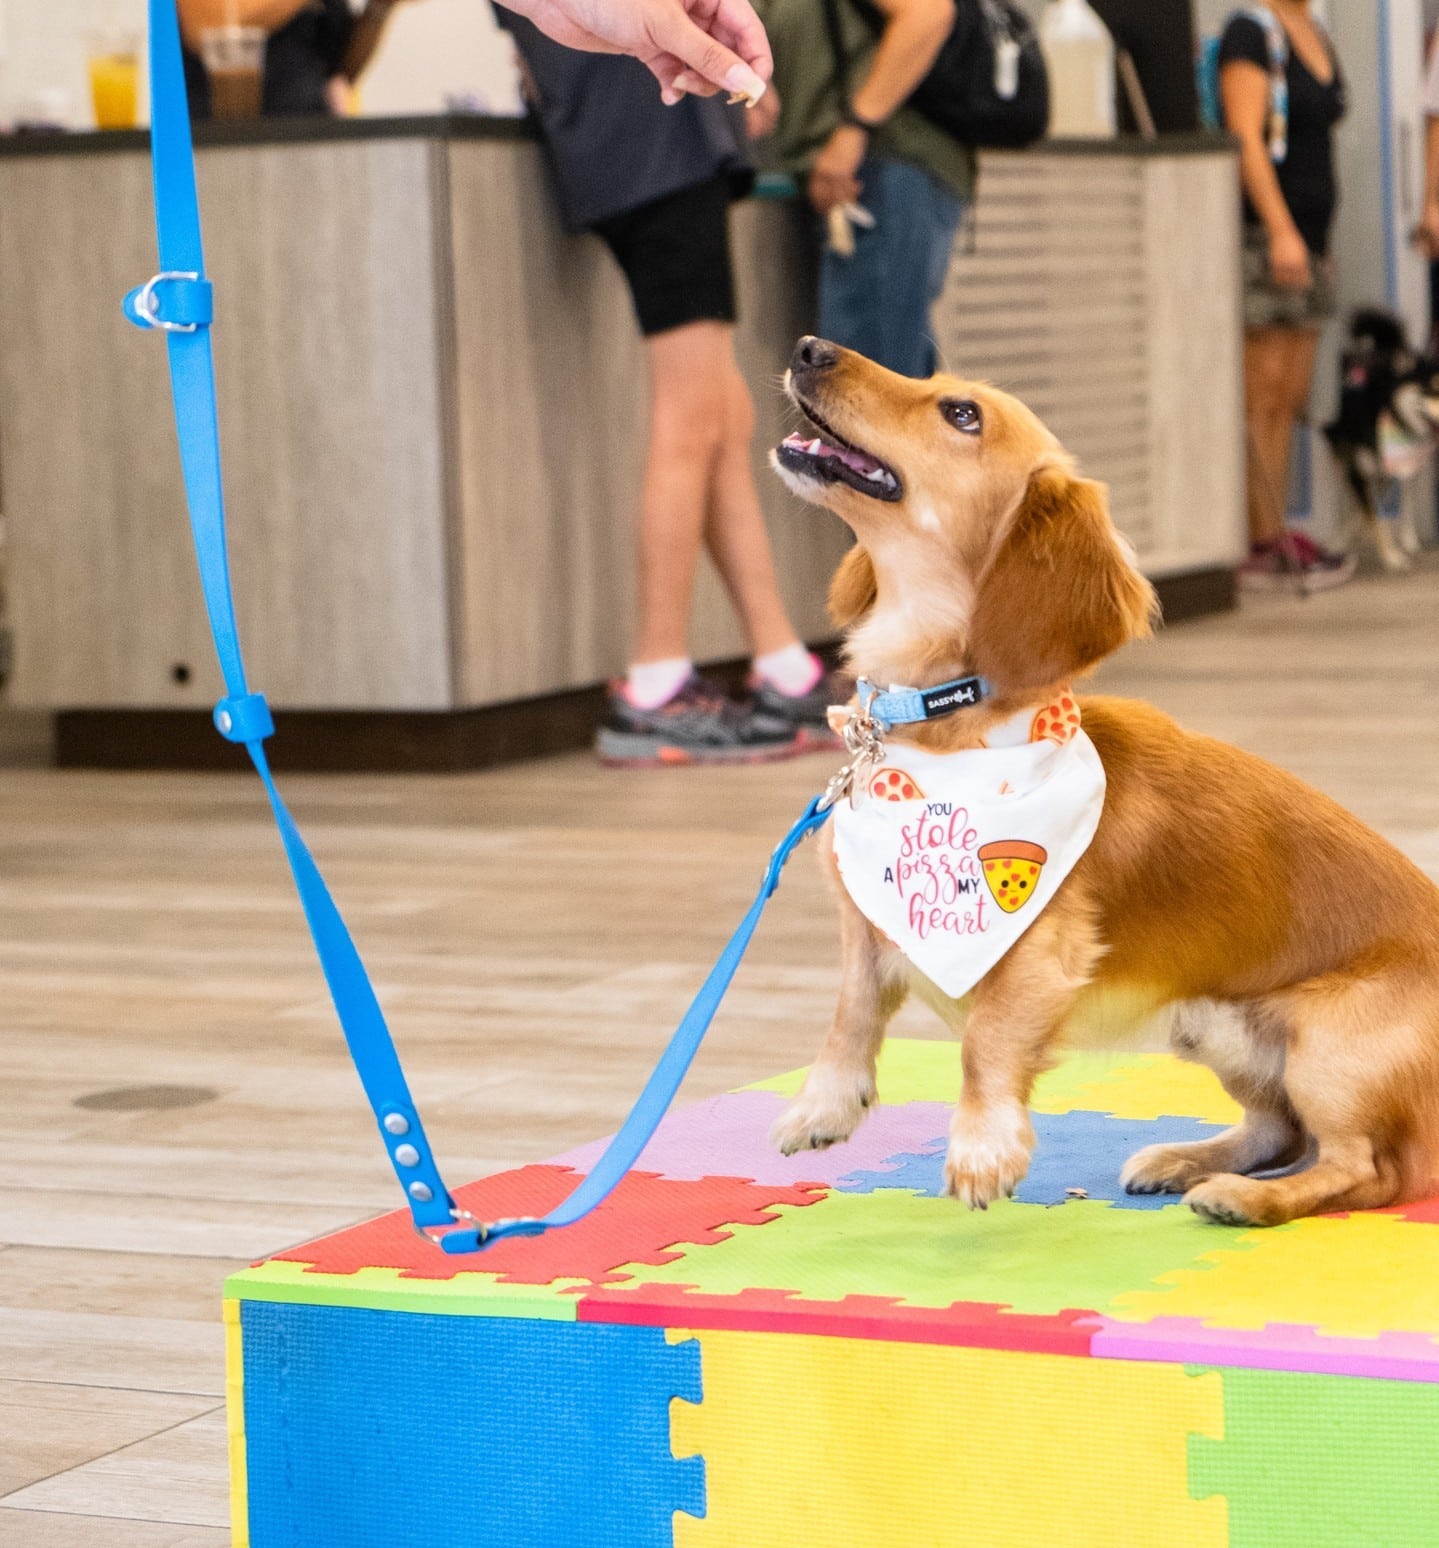 The Aloha Pet & Family Fair is returning to South Shore Market July 9-10, from 10am-3pm! The weekend will be full of pet-themed activities, demonstrations, giveaways, and more for the entire family to enjoy. Click the link in our bio to learn more.